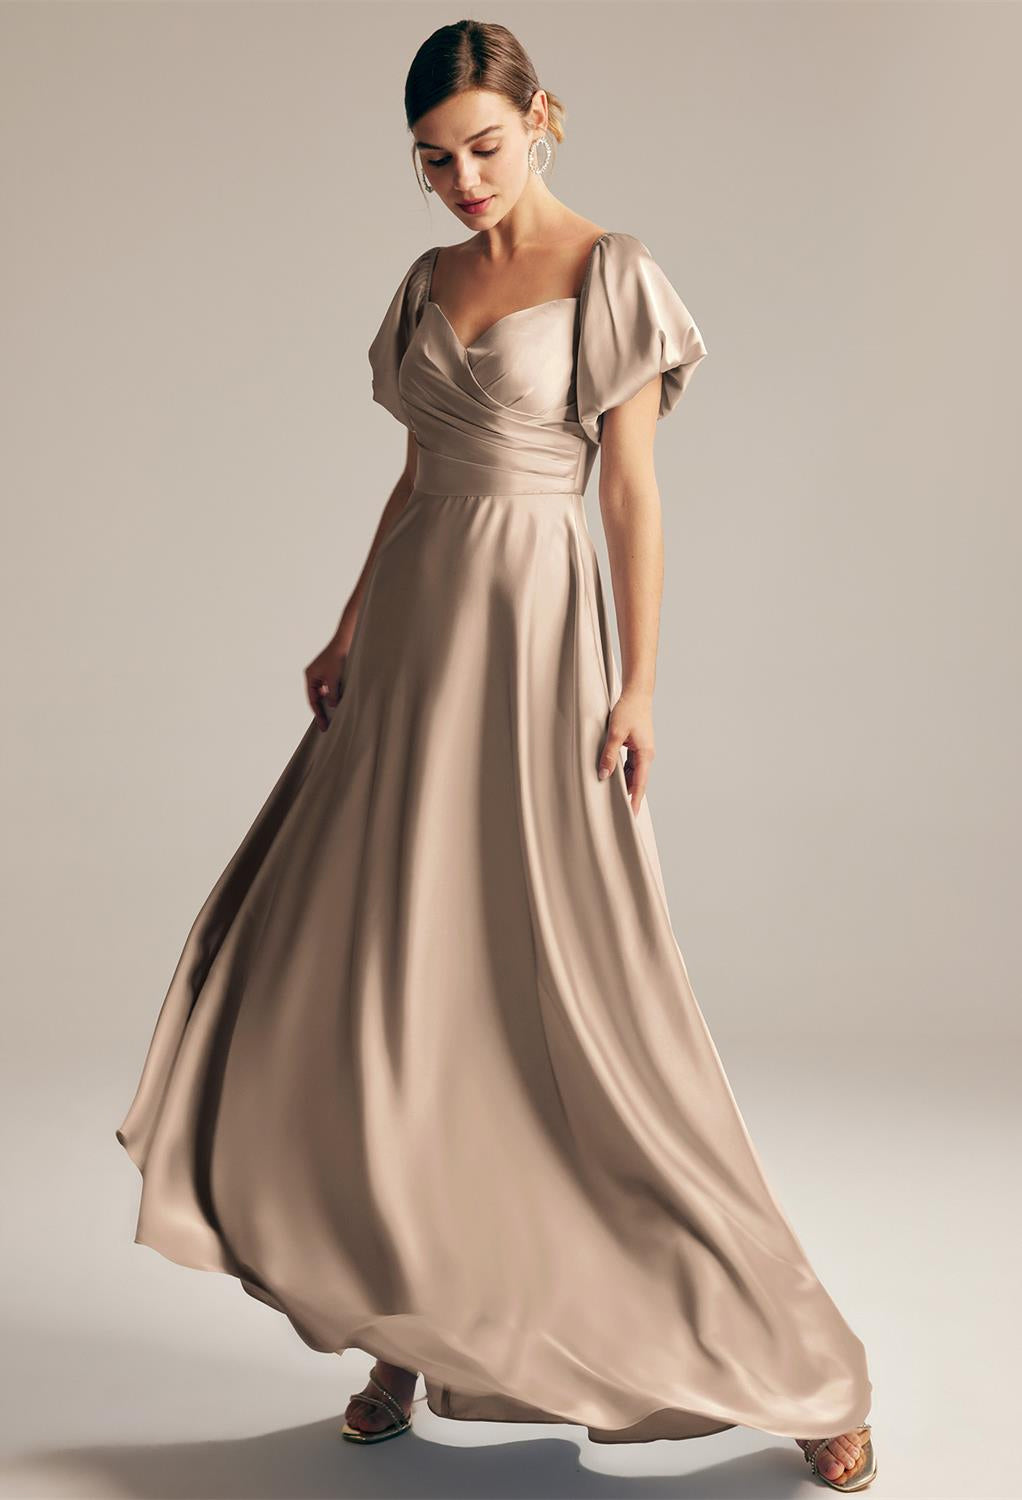 The bride is wearing a Dey - Satin Charmeuse Bridesmaid Dress - Off The Rack by Bergamot Bridal.